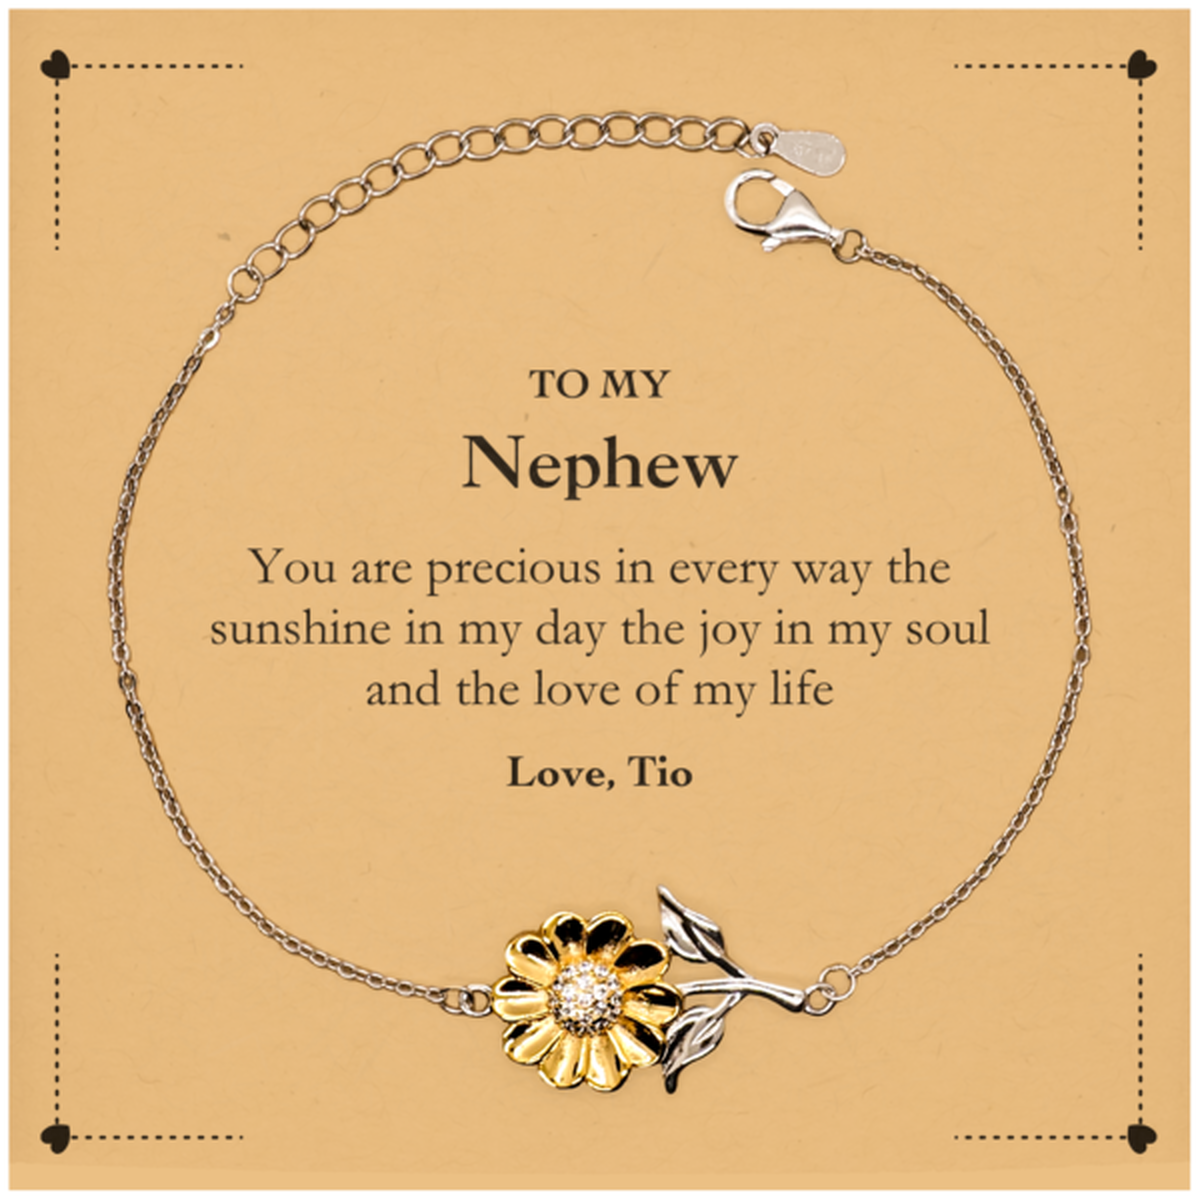 Graduation Gifts for Nephew Sunflower Bracelet Present from Tio, Christmas Nephew Birthday Gifts Nephew You are precious in every way the sunshine in my day. Love, Tio